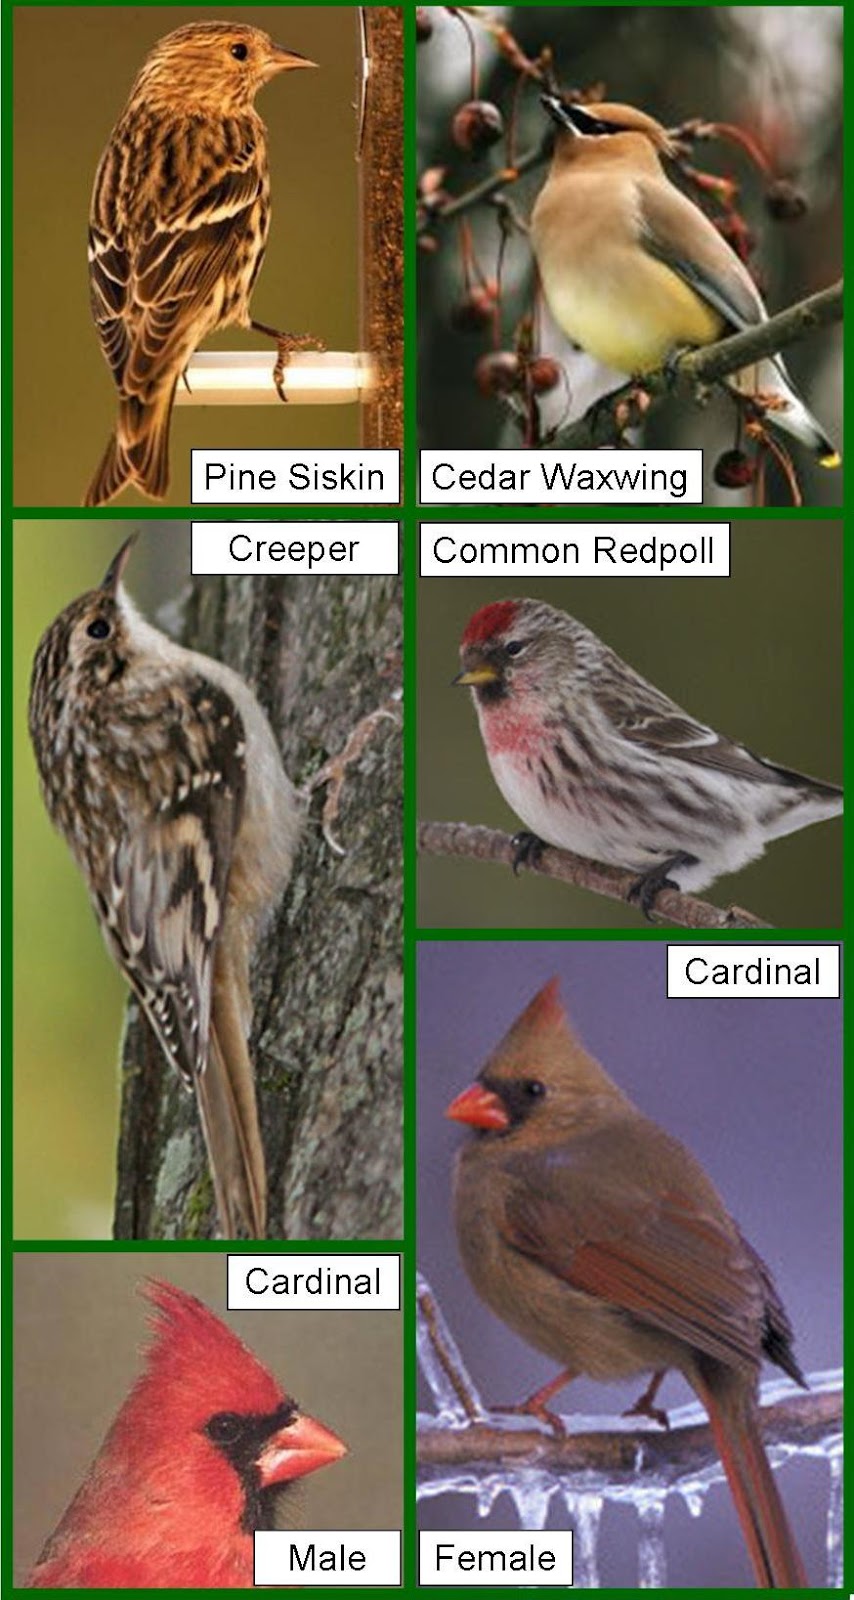 What are some tips for identifying wild birds?